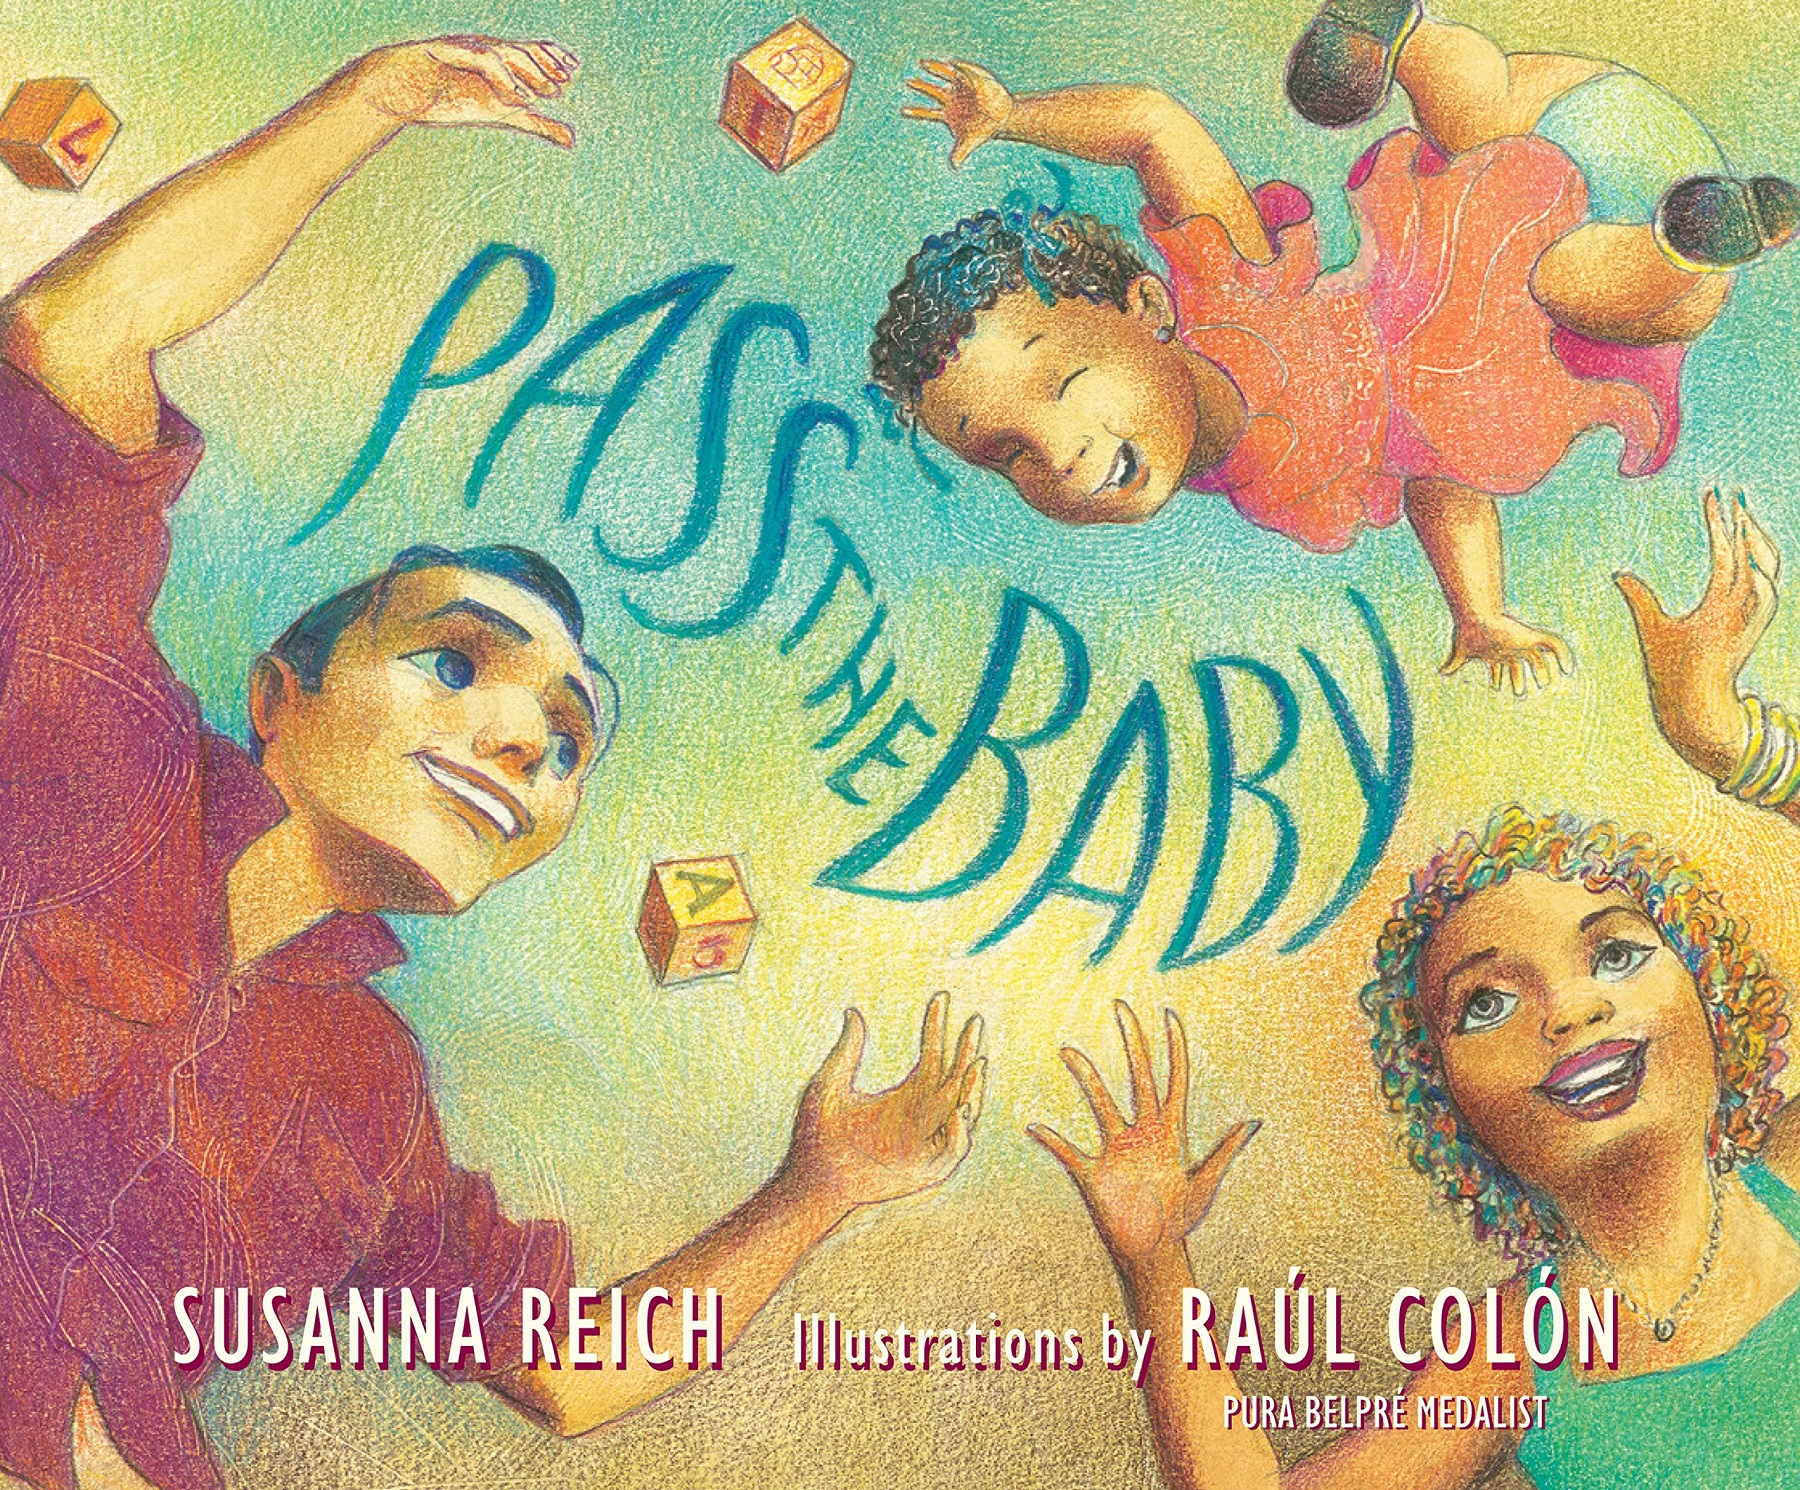 Book cover of Pass the Baby, written by Susanna Reich